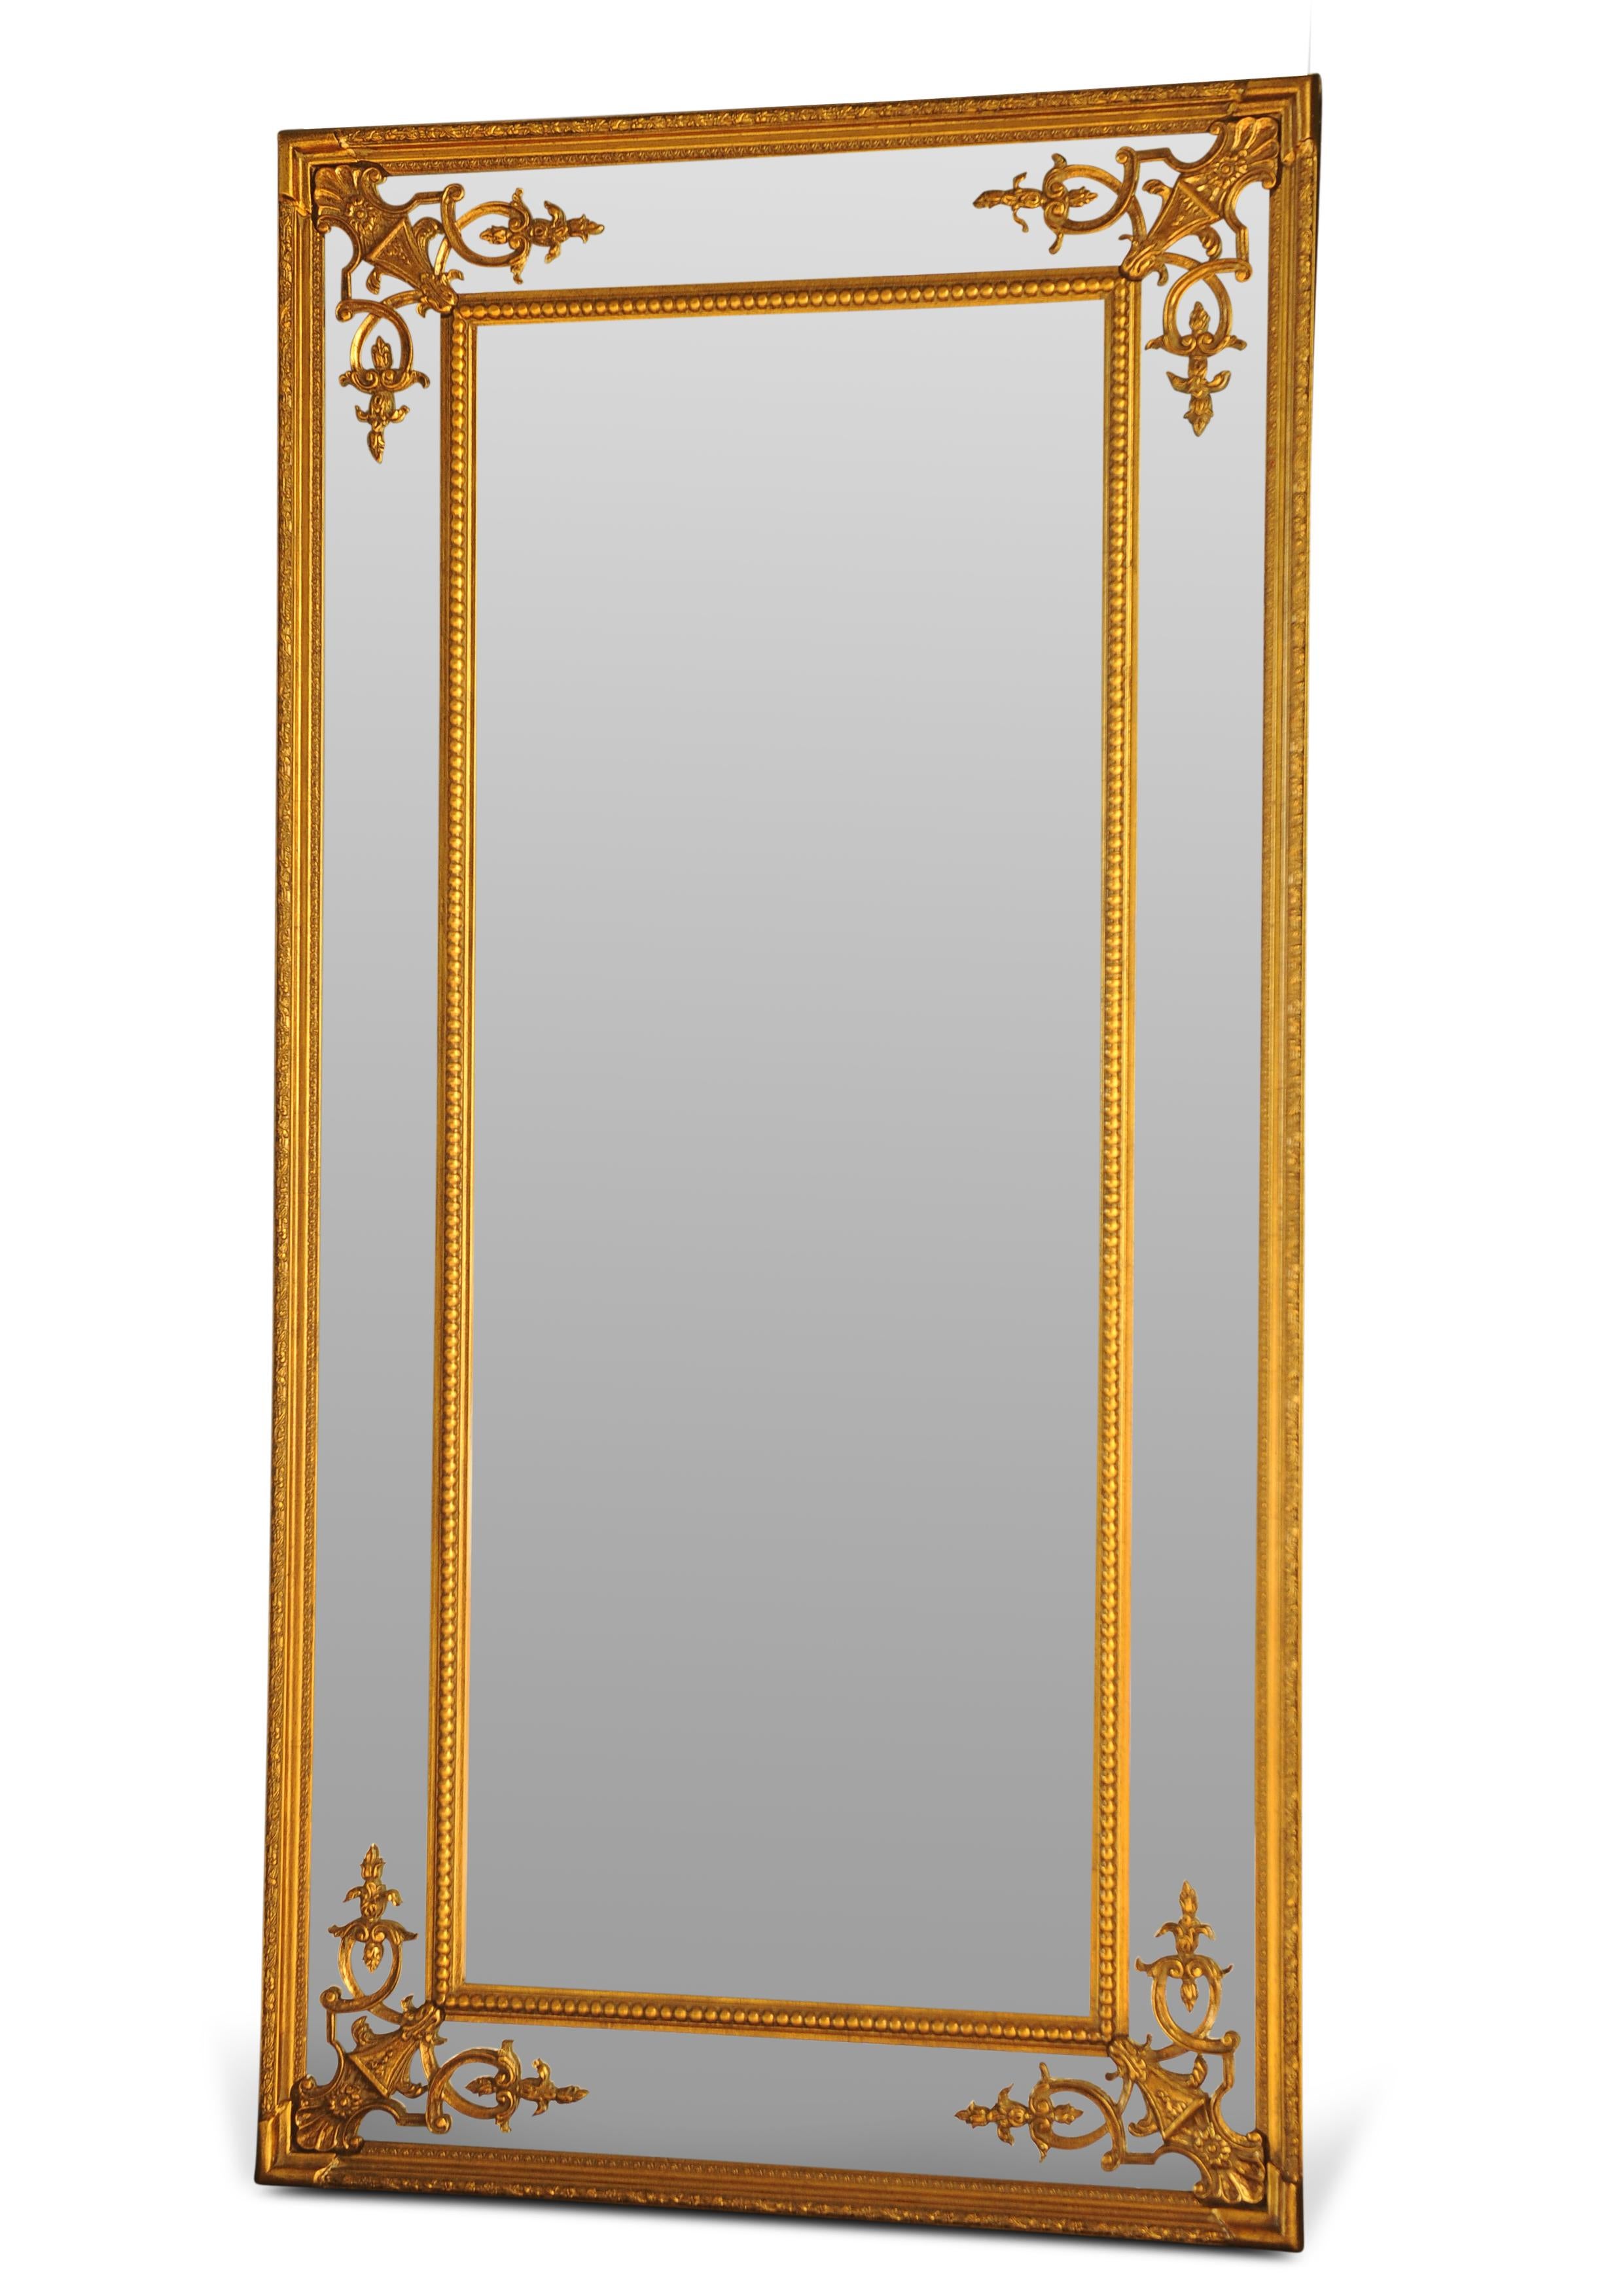 An Italian Overmantel Giltwood and Gesso Wall Mirror With Marginal Plates and Beaded Frame

Depending on how you wish to hang the item

Height 92cm x Width 183cm

or

Width 92cm x Height 183cm